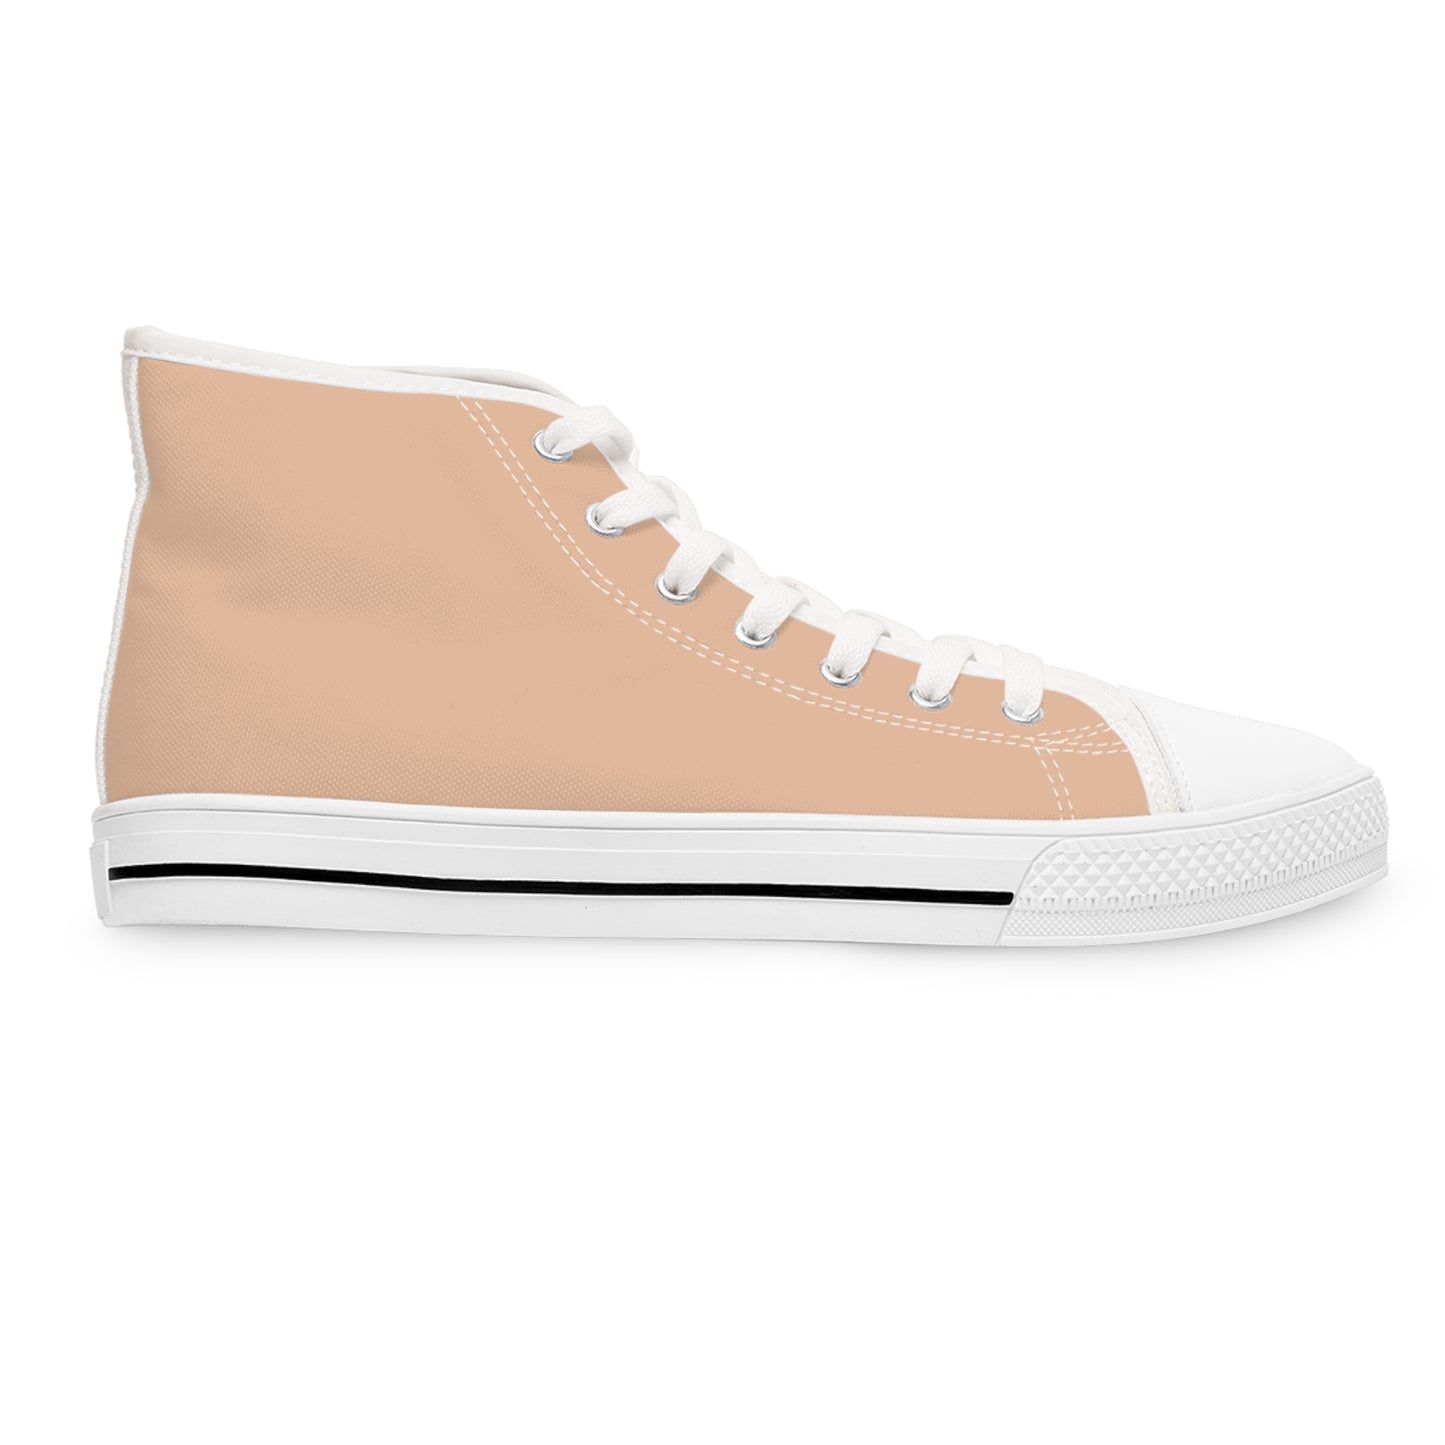 Women's Canvas High Top Solid Color Sneakers - Orange Cream US 12 White sole